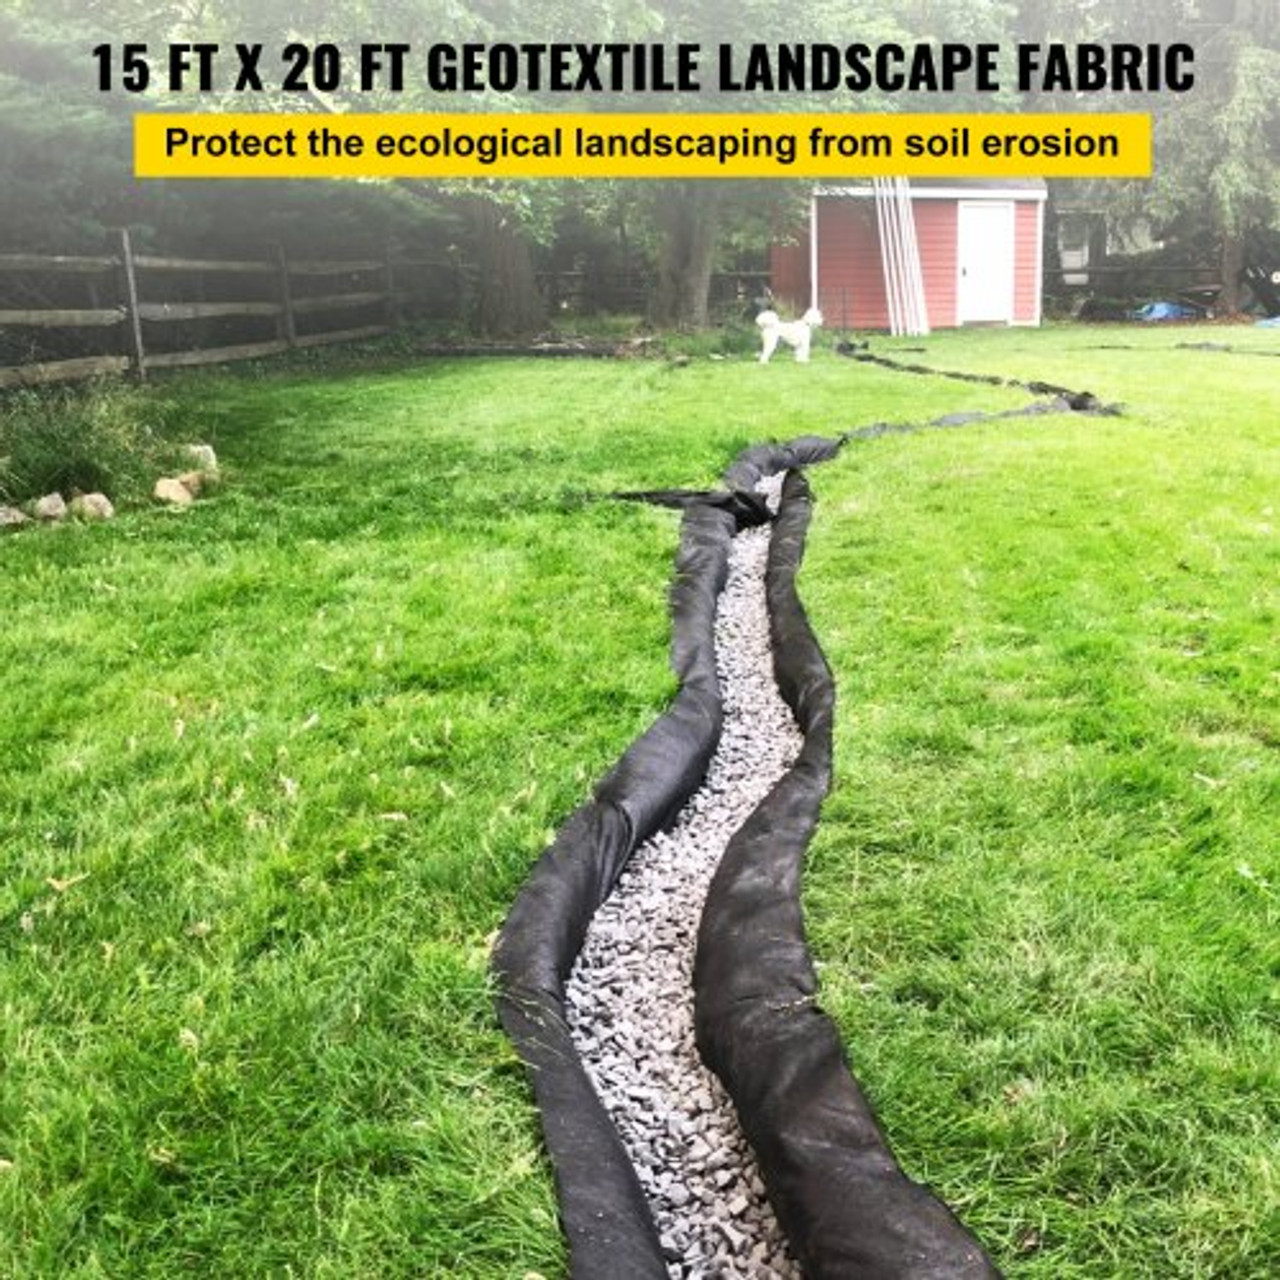 Garden Weed Barrier Fabric, 4OZ Heavy Duty Geotextile Landscape Fabric, 15ft x 20ft Non-Woven Weed Block Gardening Mat for Ground Cover, Weed Control Cloth, Landscaping, Underlayment, Black